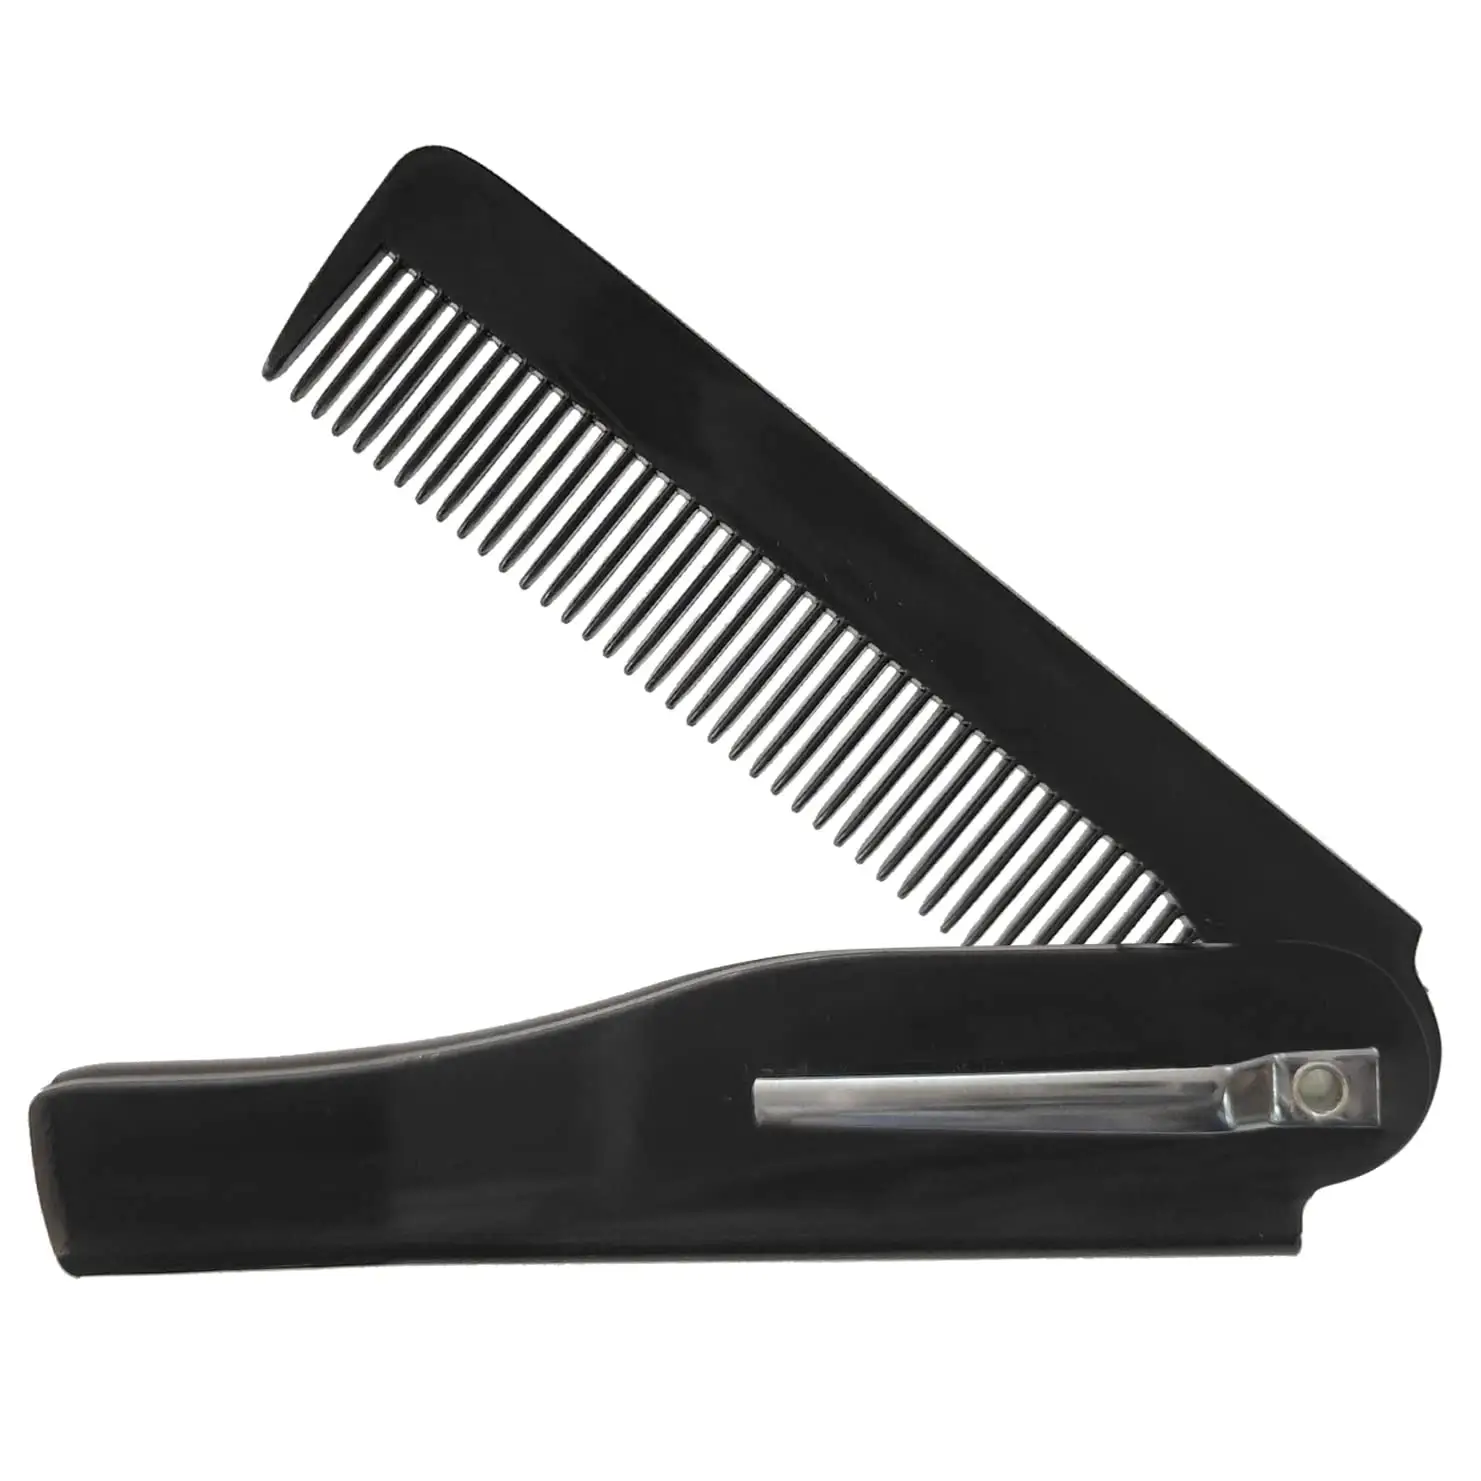 Ready To Ship Beard Mustache Combs Black Color Beard Straightening Brush And Comb Set Low Quantity High Quality